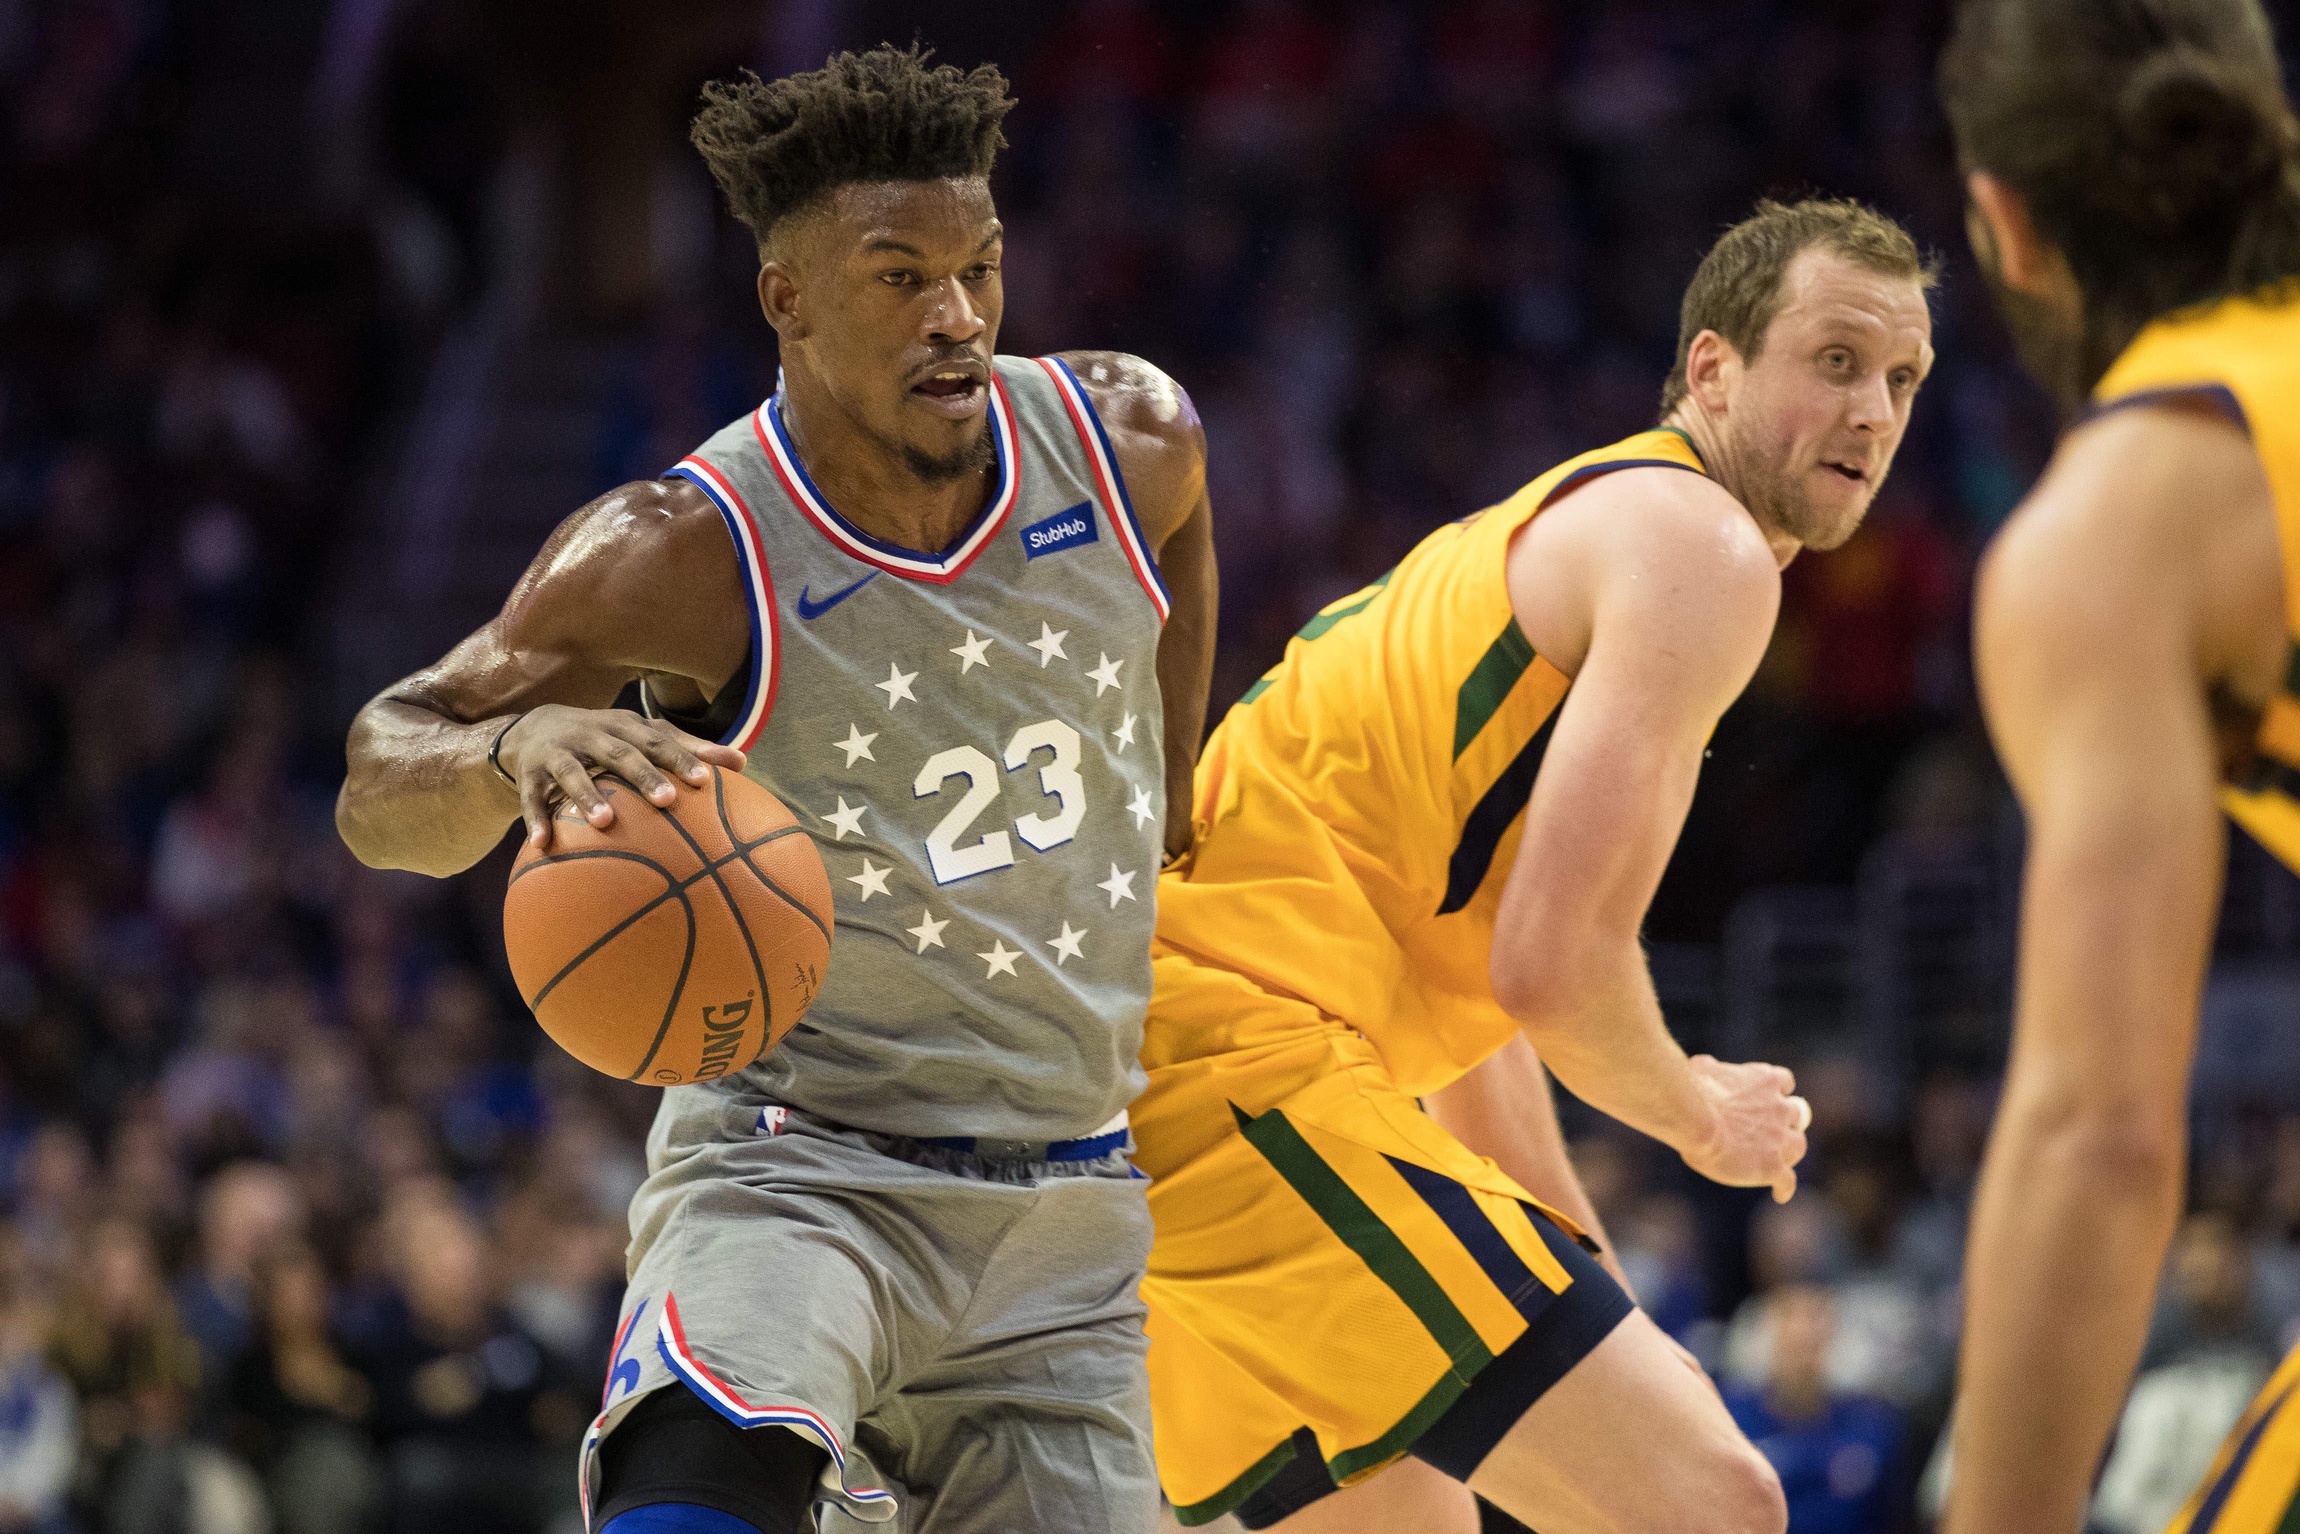 Jimmy Butler’s Sixers WFC Debut Delivered the Goods